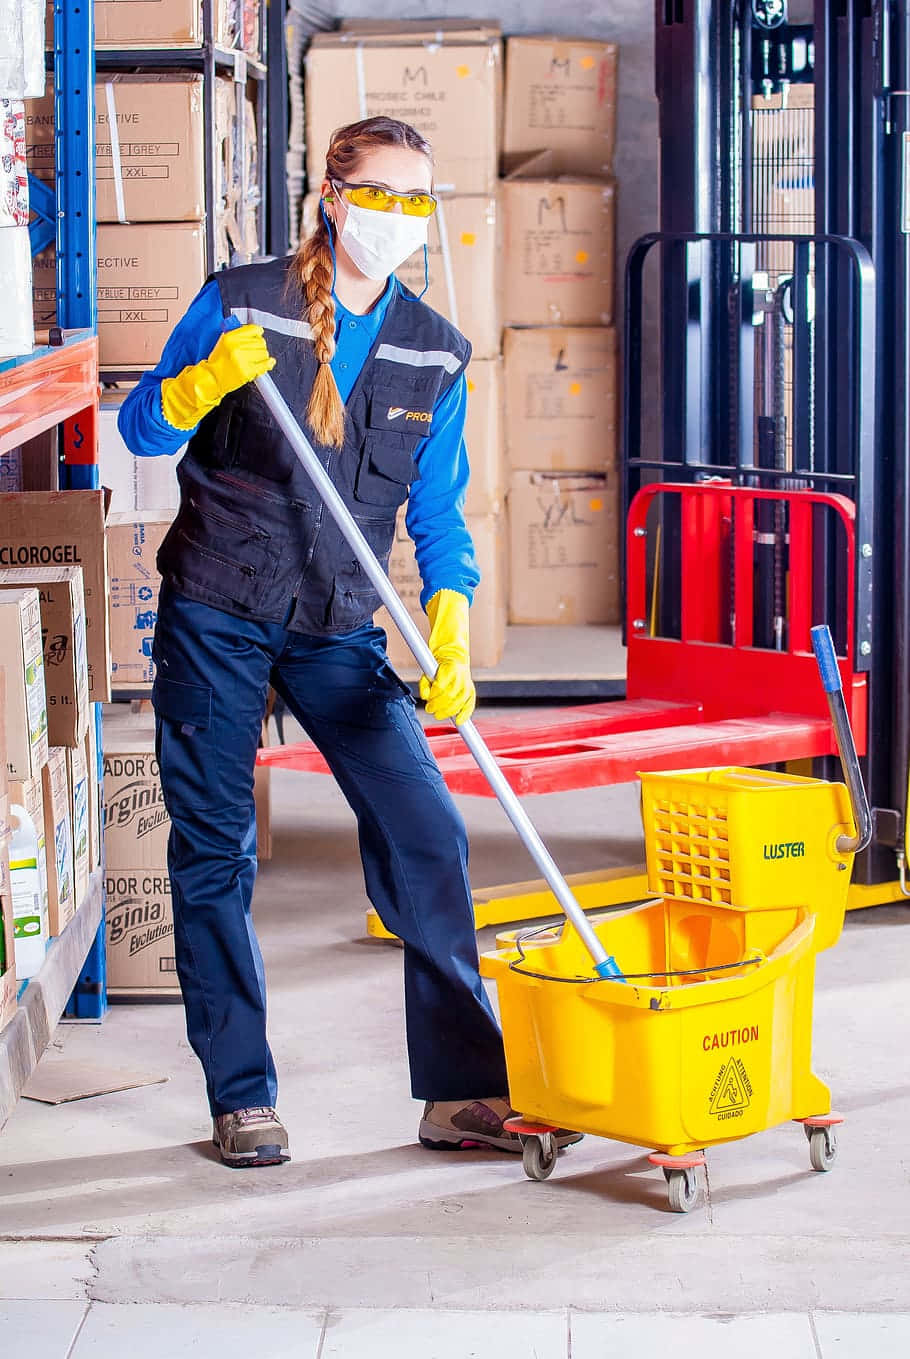 Warehouse Cleaning Professionalin Action Wallpaper